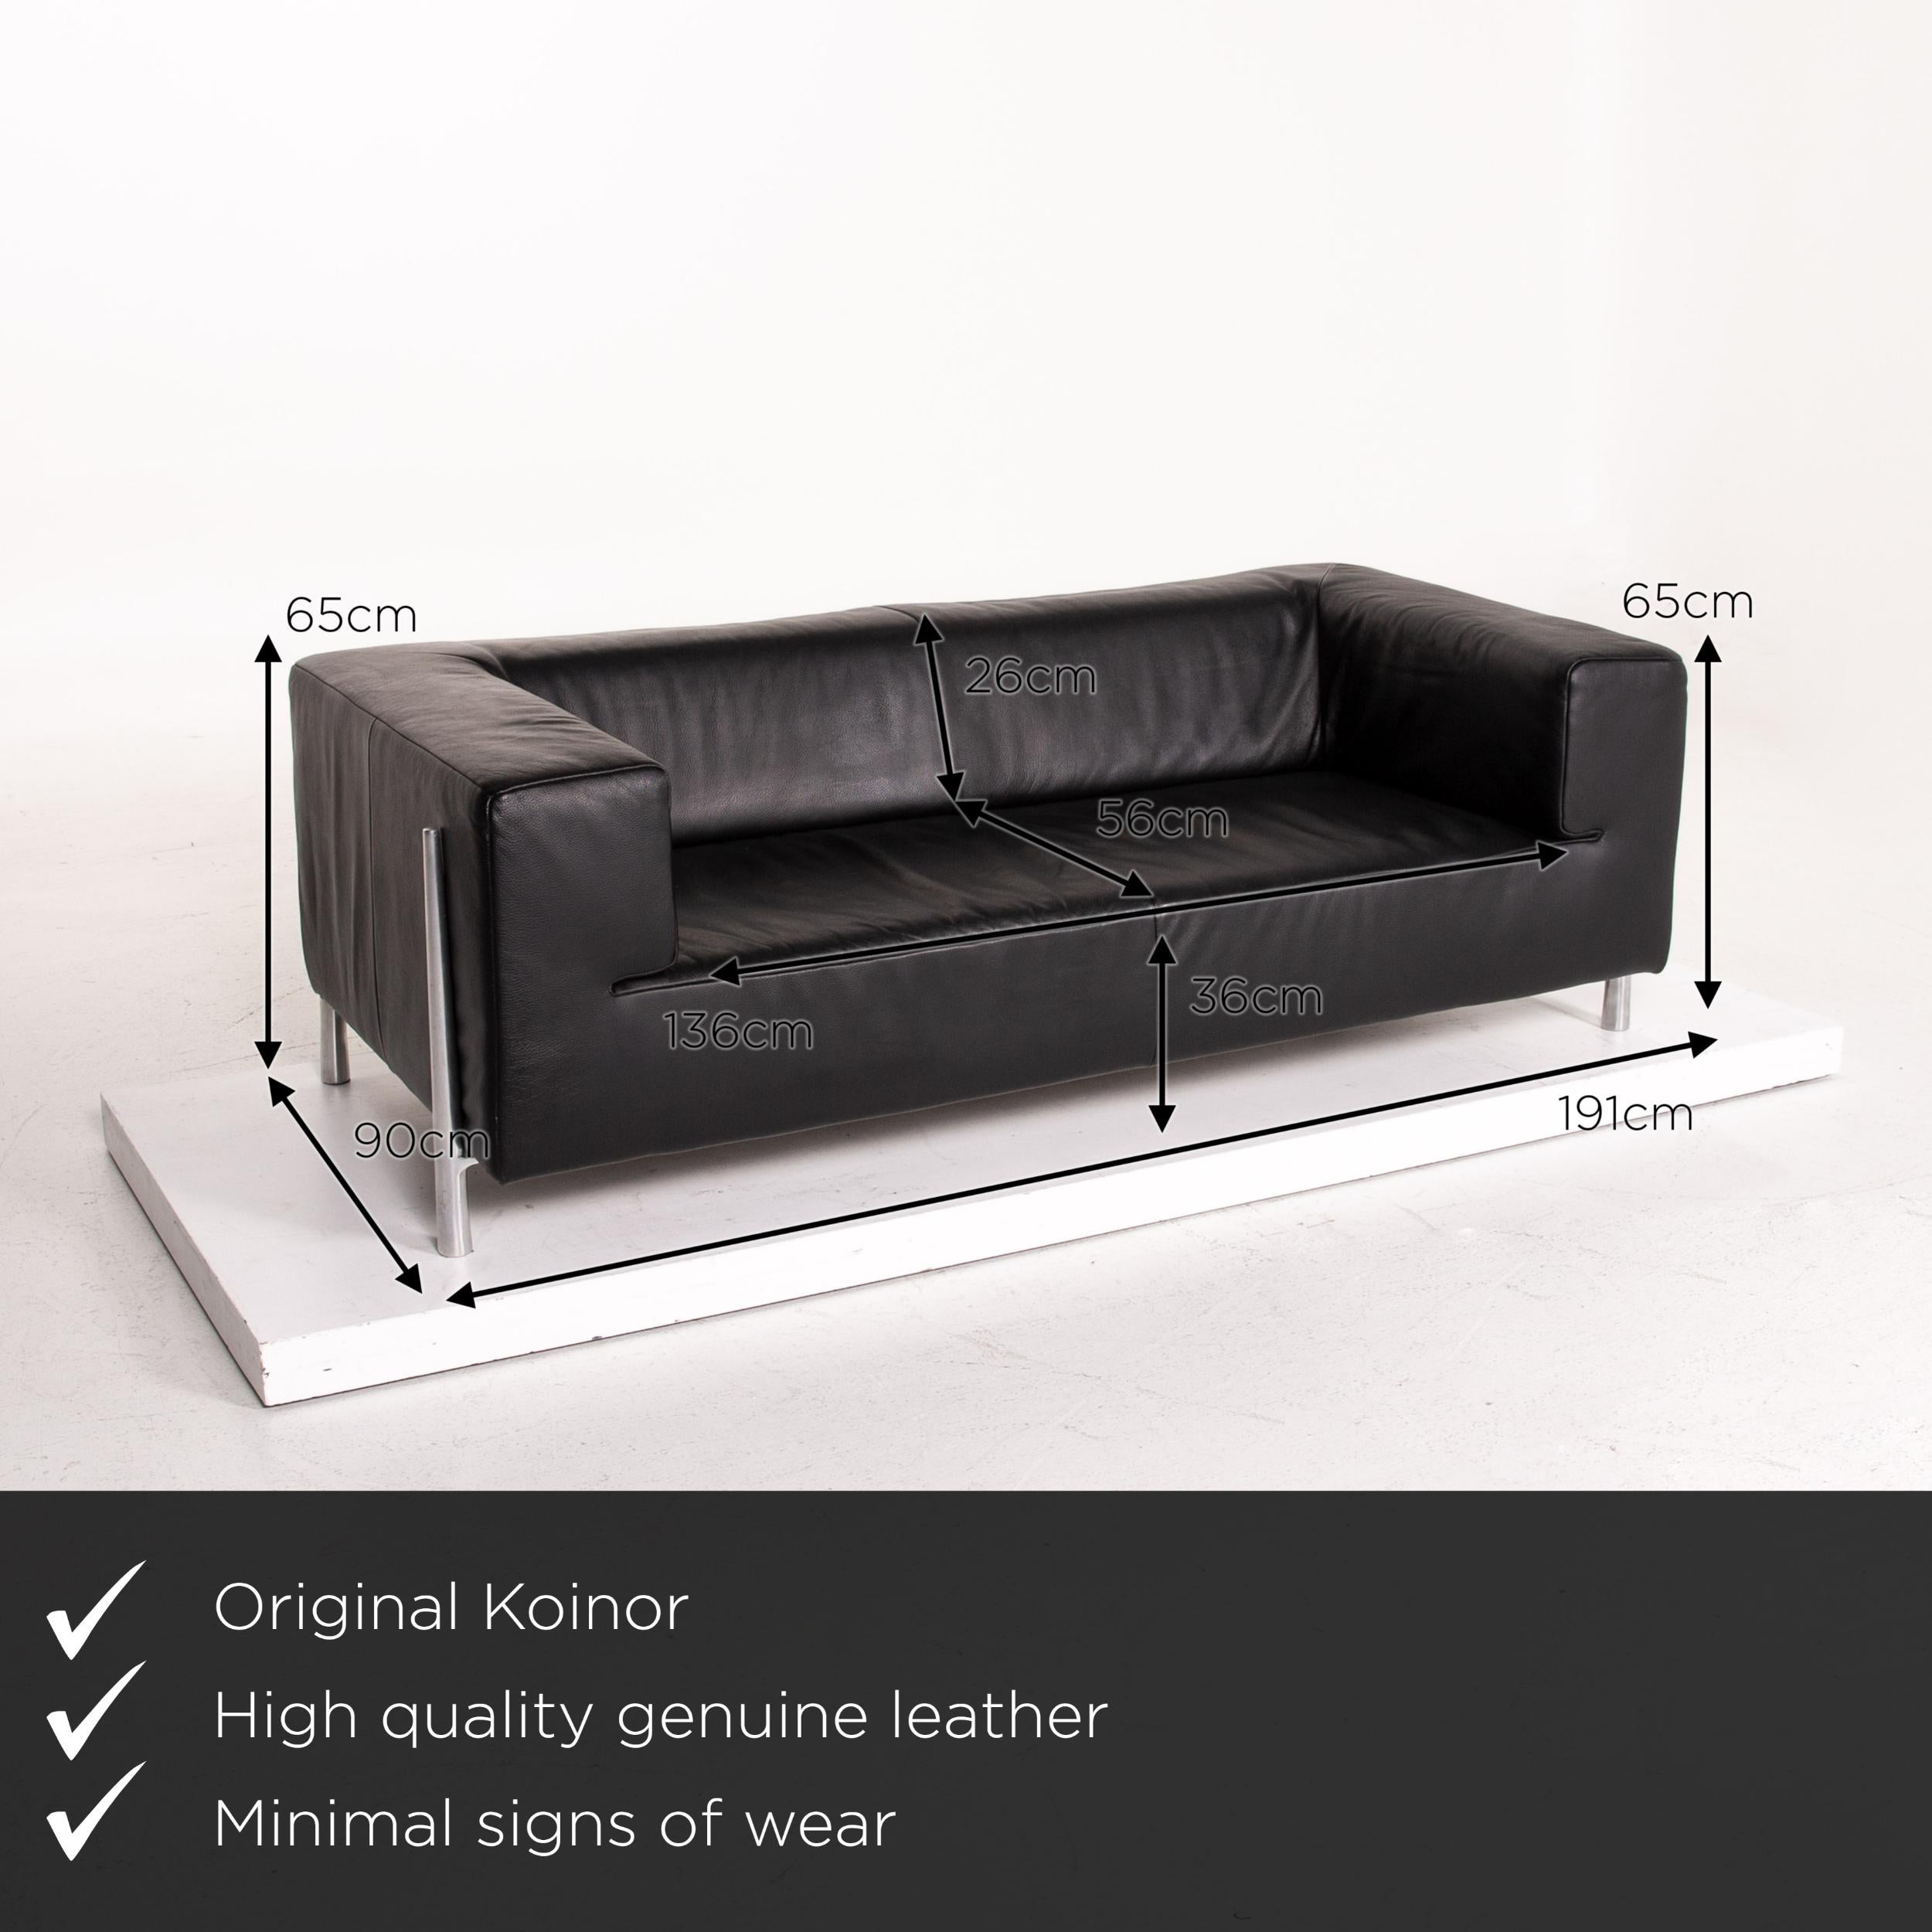 We present to you a Koinor Genesis leather sofa black two-seat couch.
  
 

 Product measurements in centimetres:
 

 depth: 90
 width: 191
 height: 65
 seat height: 36
 rest height: 65
 seat depth: 56
 seat width: 136
 back height: 26.